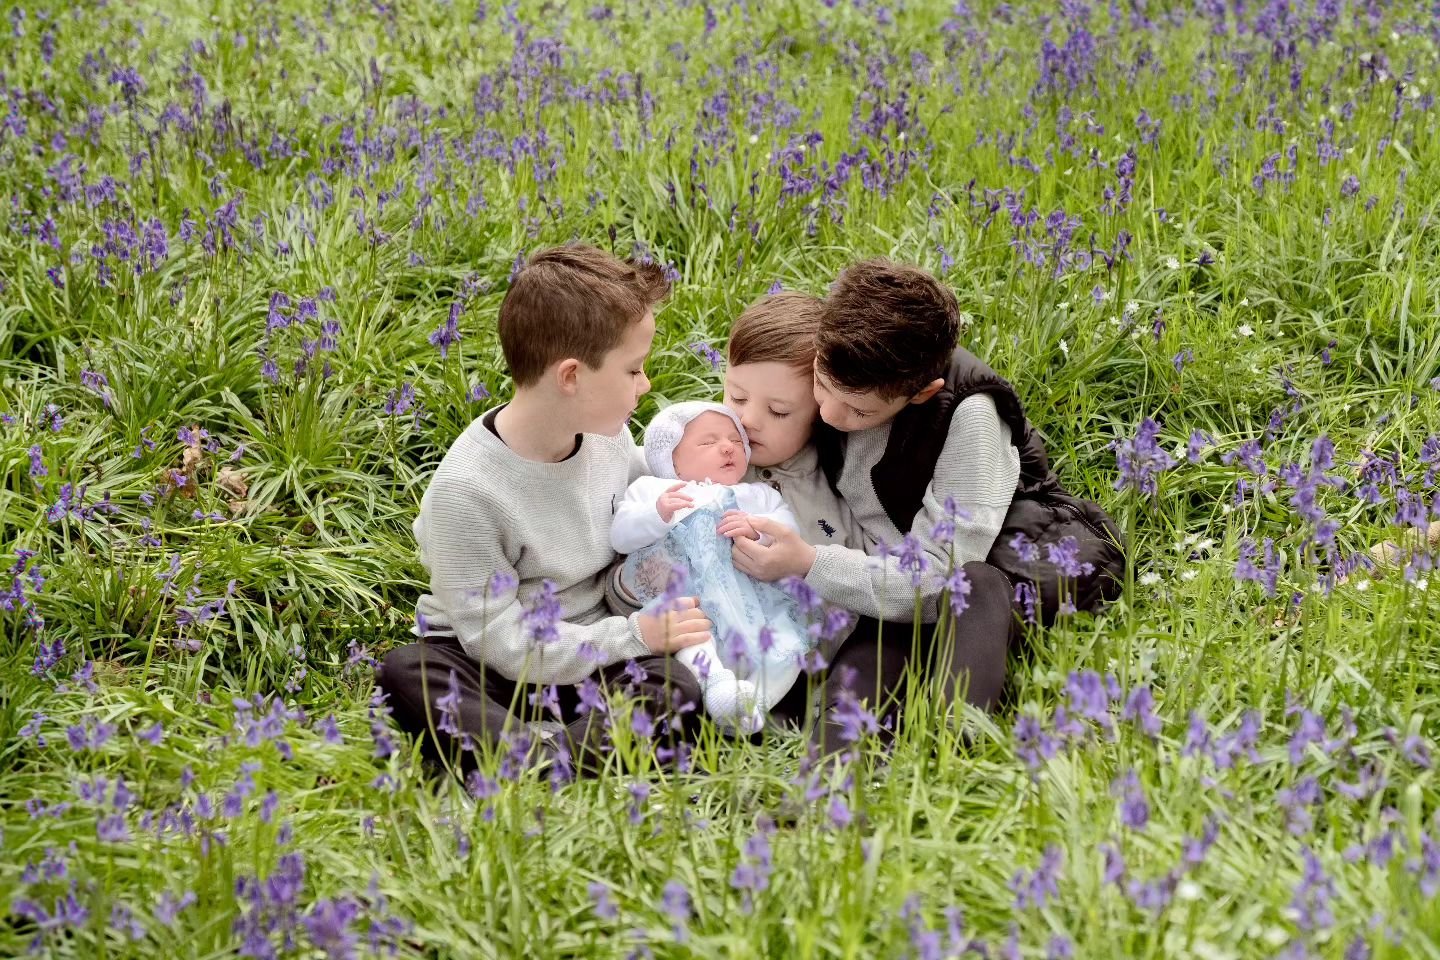 🩵 B L U E B E L L S 🩵

Have you visited your local bluebell wood this season? It's becoming quite the tradition in our family, think this is our 4th year of going en masse as a big group of us and it's such a beautiful thing to do.

Fresh air, beau